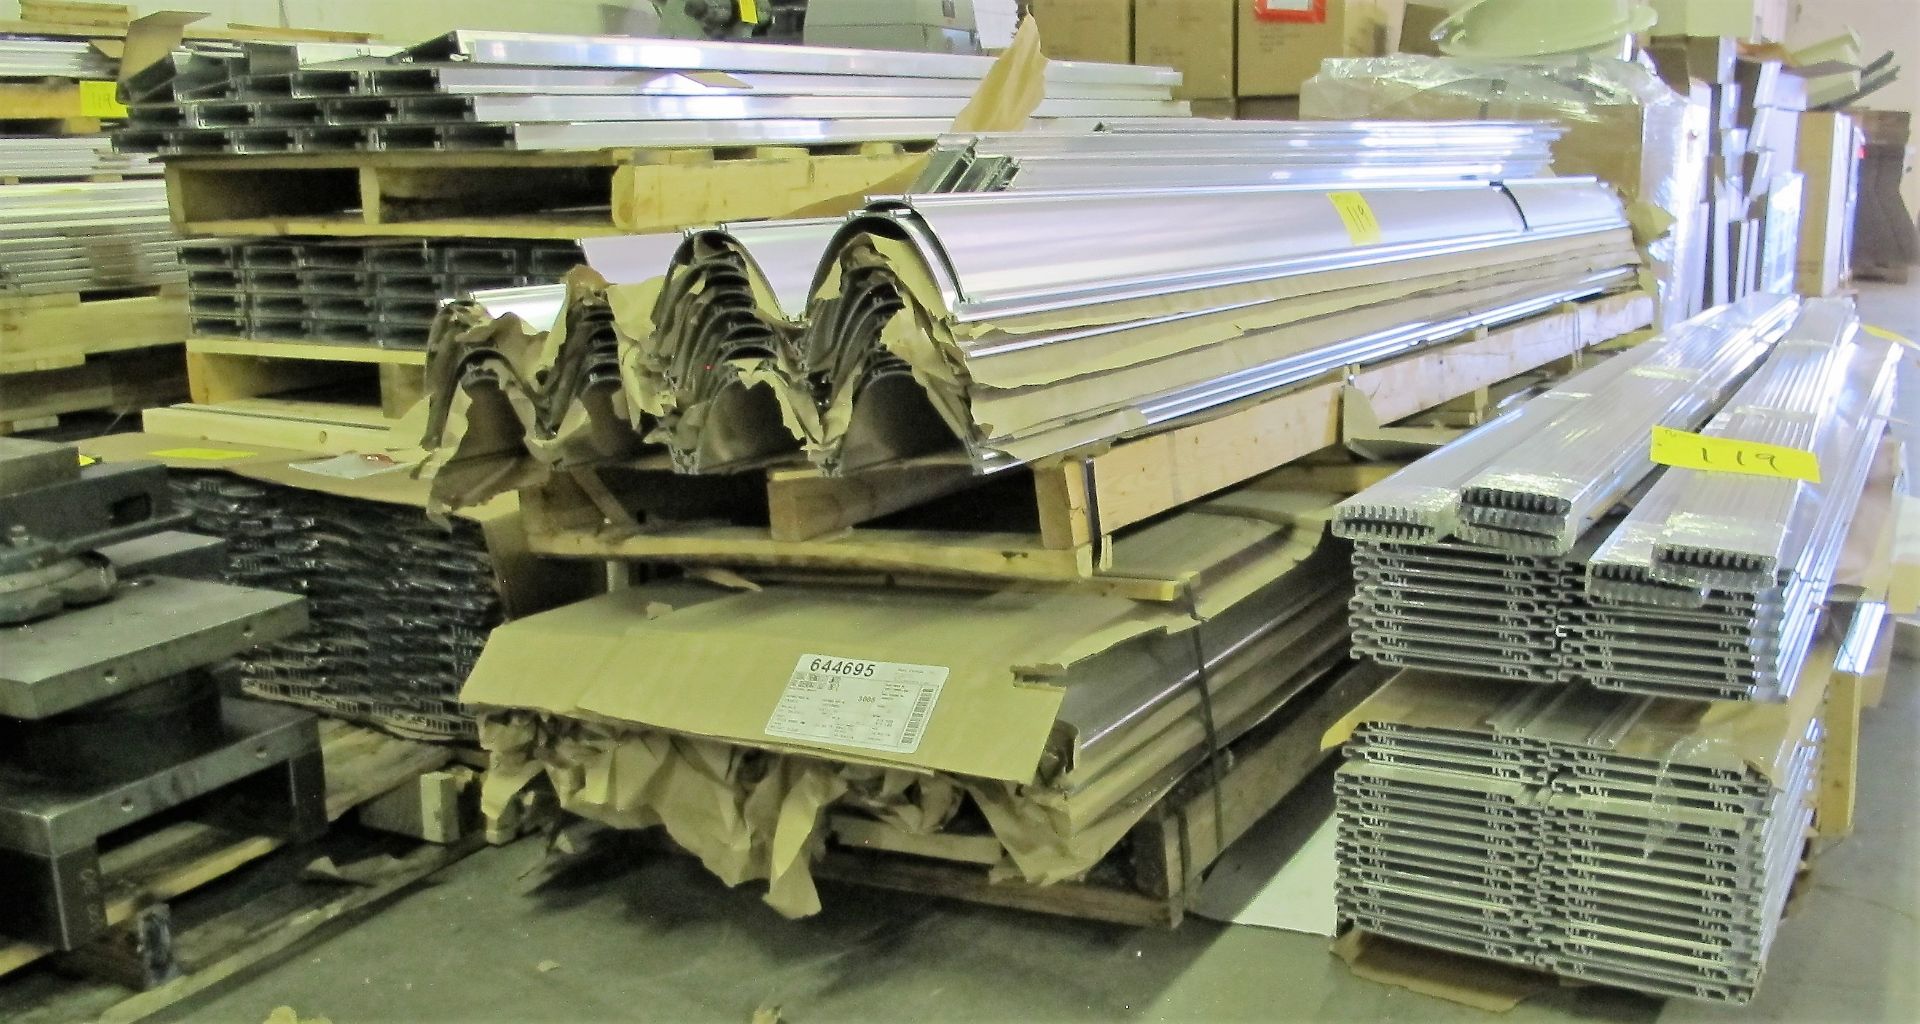 LARGE QTY OF ASST. ALUMINUM EXTRUSIONS, UP TO 8' LENGTH (APPROX. 12,500LBS) - Image 3 of 8